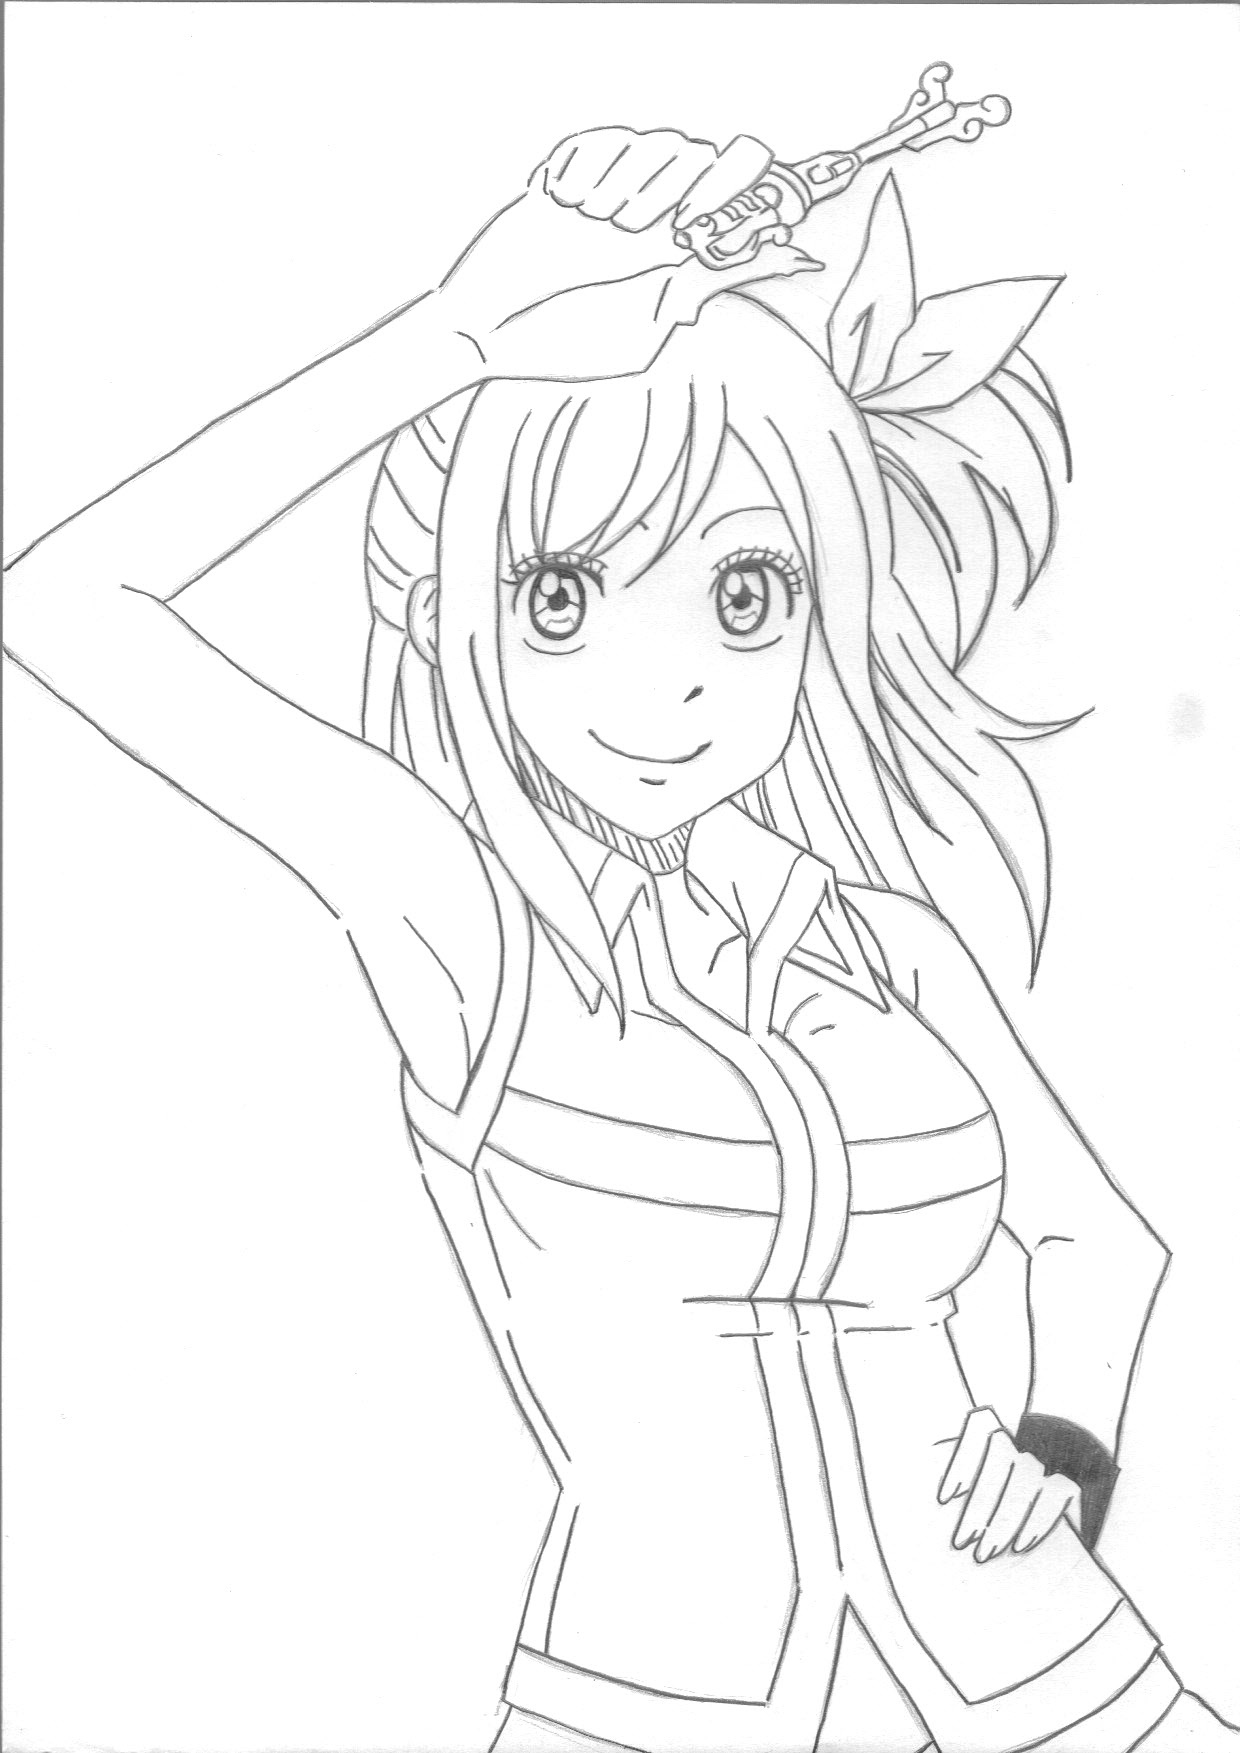 Coloriage Fairy Tail Lucy Beau Image Dessin Colorier Fairy Tail Natsu Et Lucy